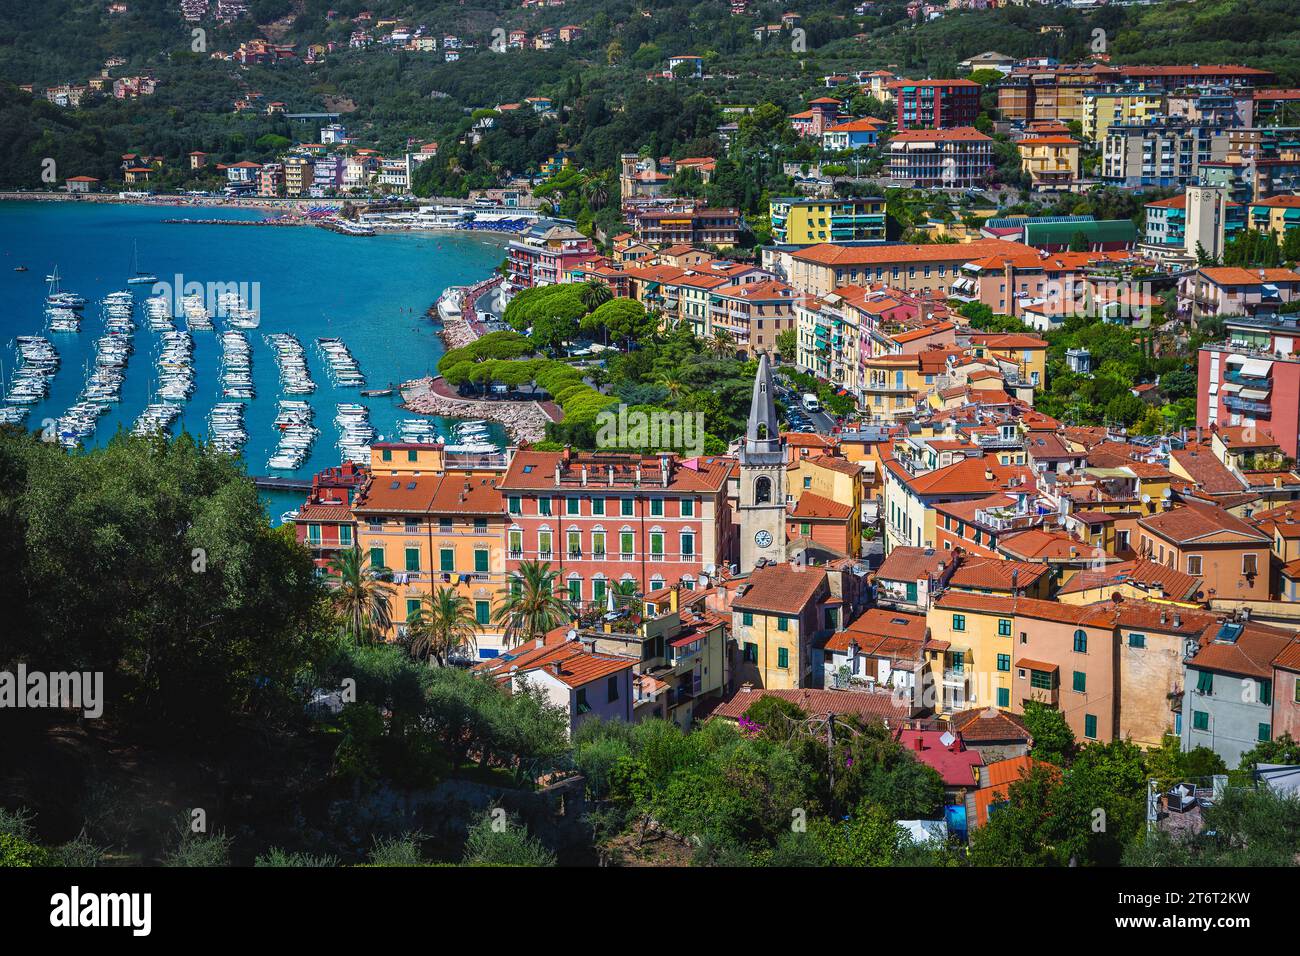 Well known beautiful mediterranean beach resort. Amazing view from the hill with harbor and seaside colorful buildings , Lerici, Liguria, Italy, Europ Stock Photo